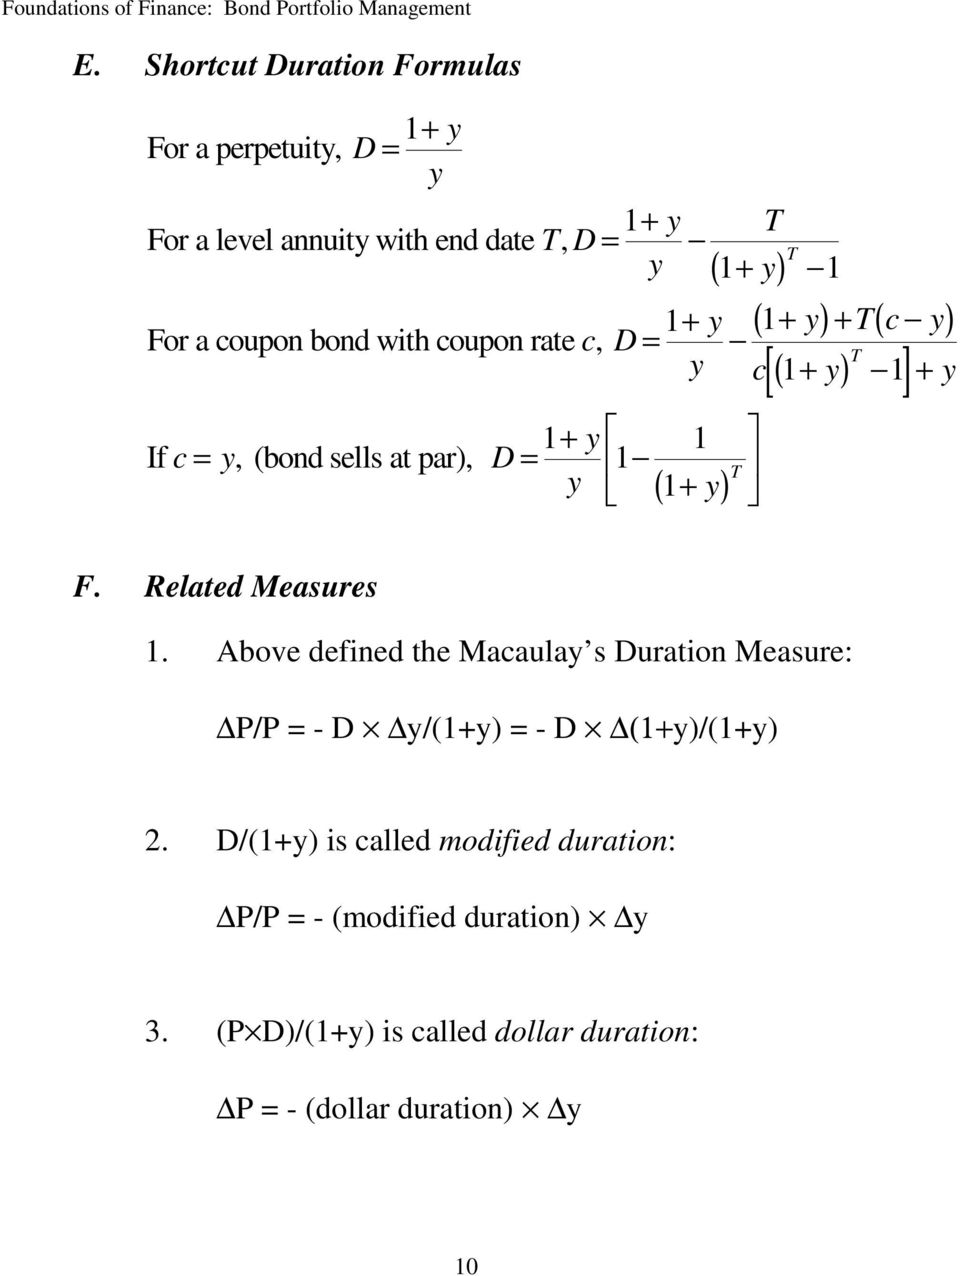 1 1 y + T [ ] F. Related Measures 1. Above defined the Macaulay s Duration Measure: P/P = - D y/(1+y) = - D (1+y)/(1+y) 2.